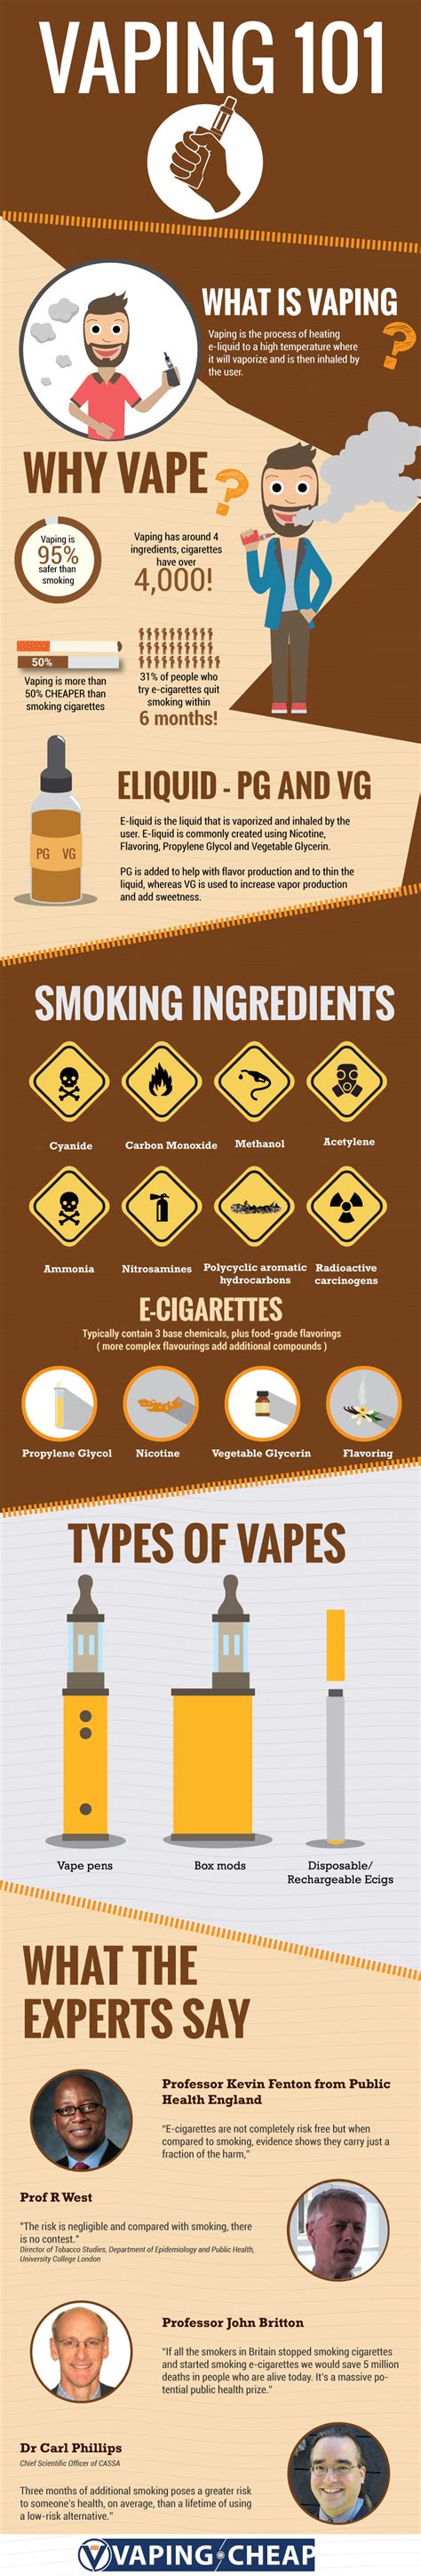 Flavorah Flv Vaping Enriches Lives Youtube Video And Infographic